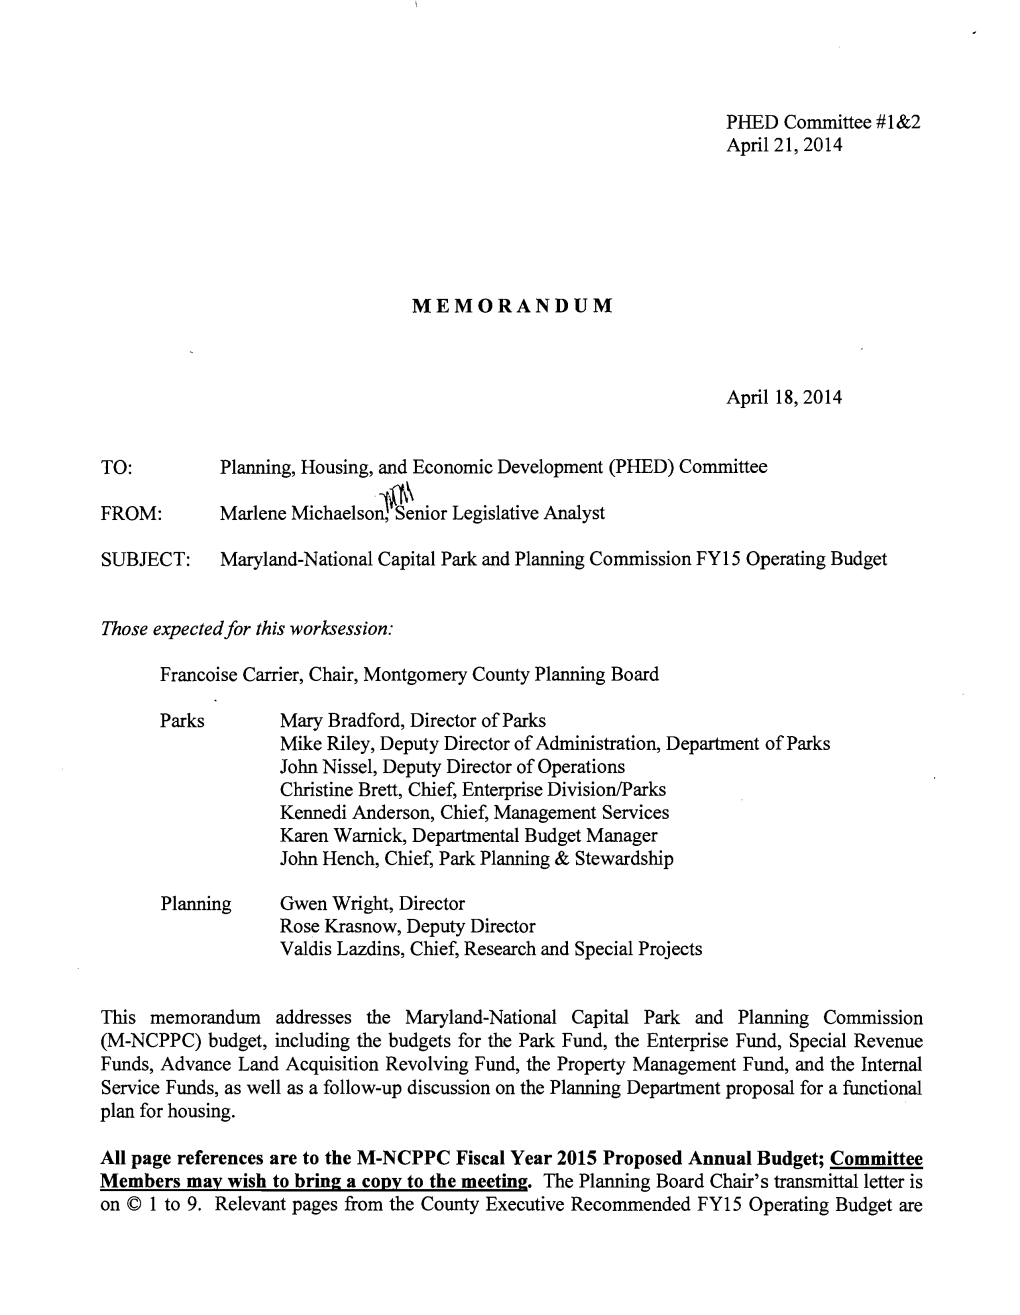 PHED Committee # 1&2 April 21, 2014